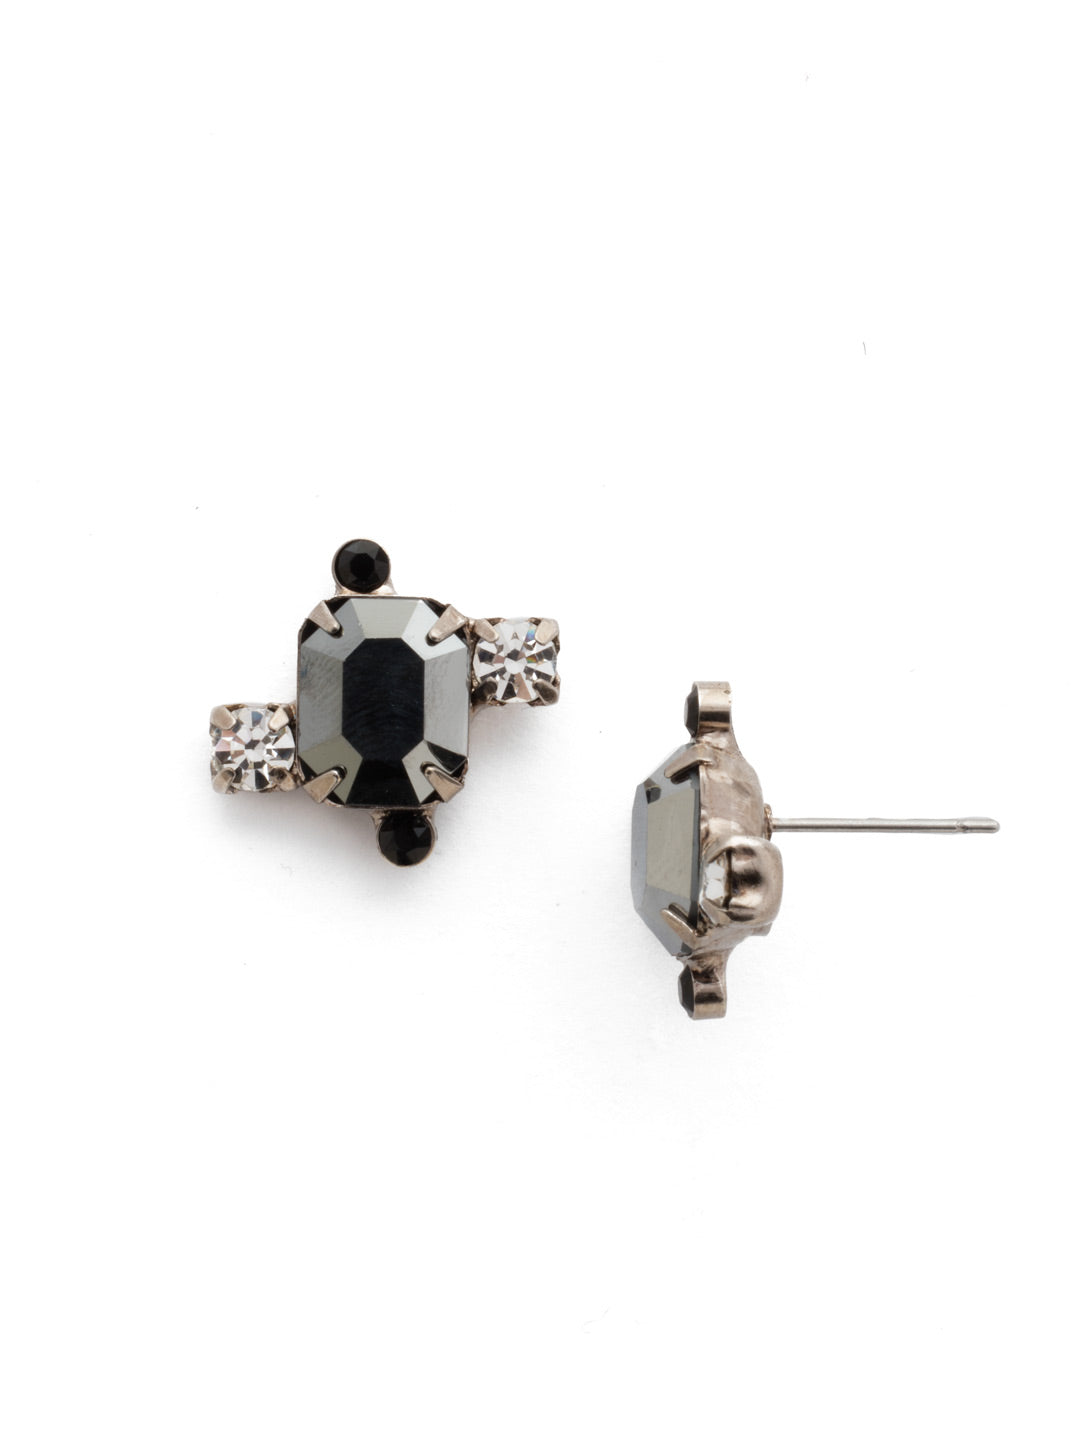 Esmere Stud Earring - EEE17ASHMT - The Esmere Stud Earring is a brilliant emerald cut crystal, highlighted by smaller hints of sparkle around it. Small in size, but significant in shine, these studs are the perfect addition to layers of dainty necklaces or a single statement necklace.